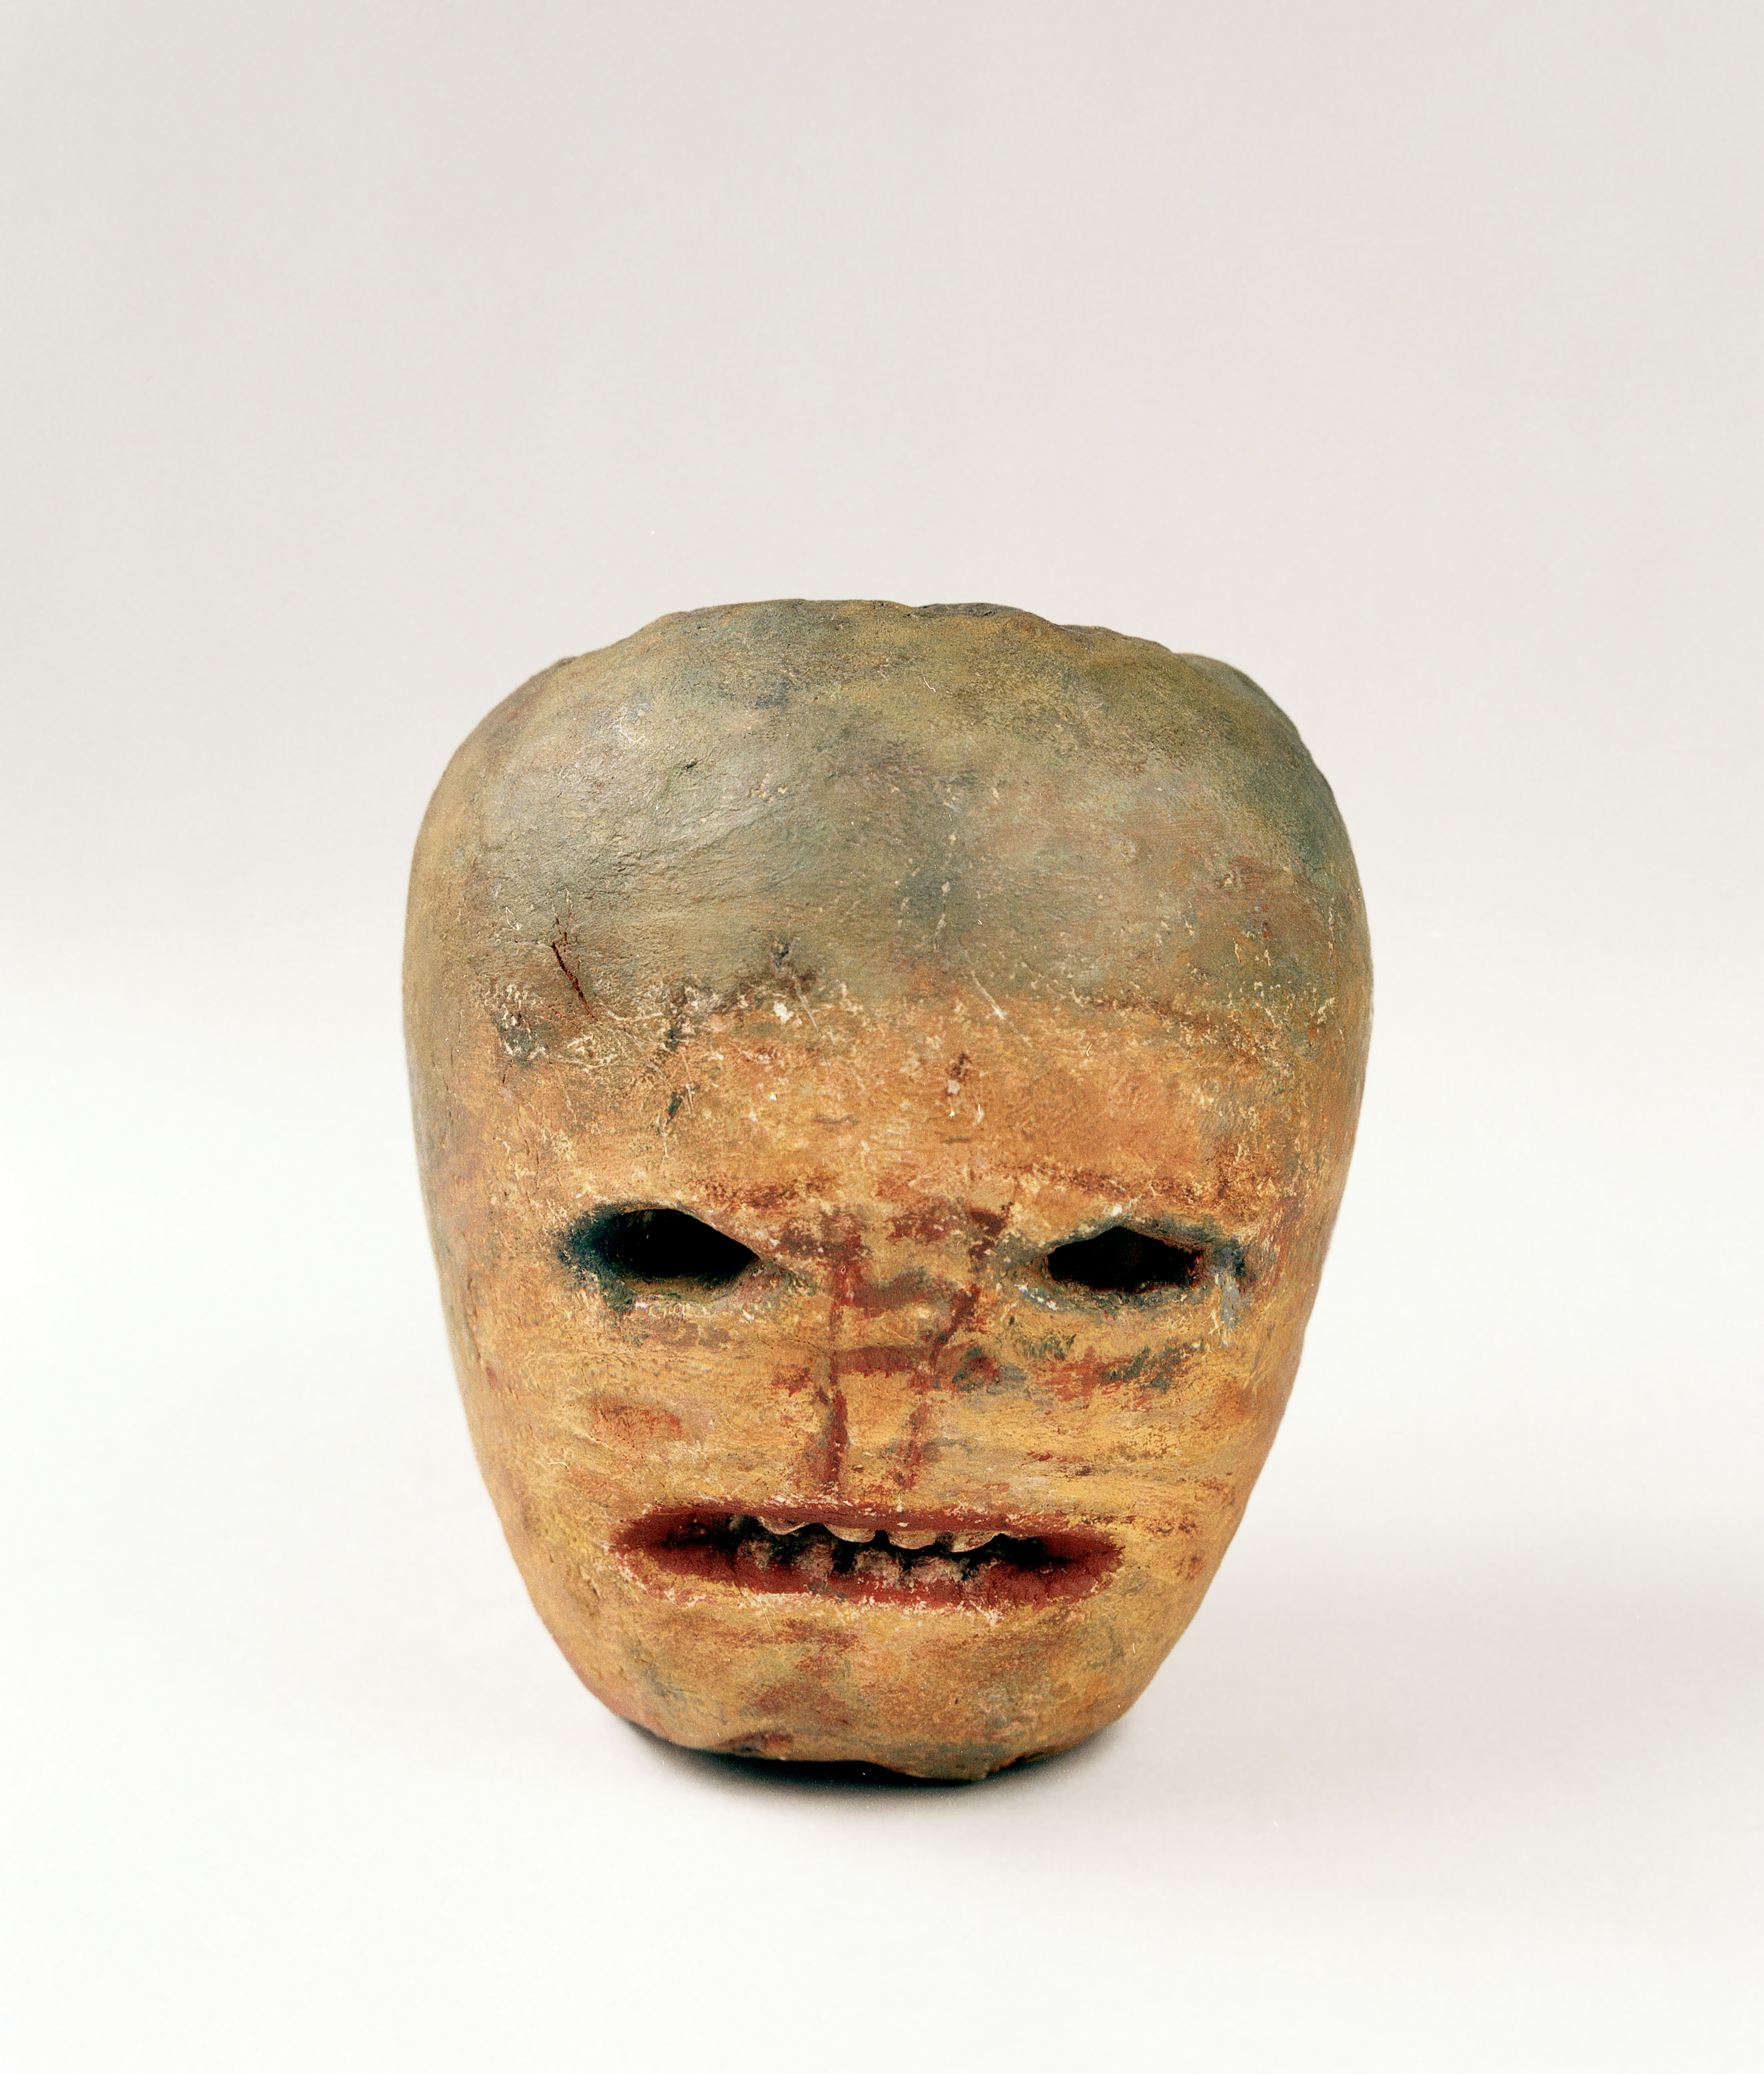 A 19th century jack-o-lantern from Fintown in County Donegal, Ireland, is part of a display at the Museum of Country Life in County Mayo, Ireland. (CNS photo/courtesy National Museum of Ireland)